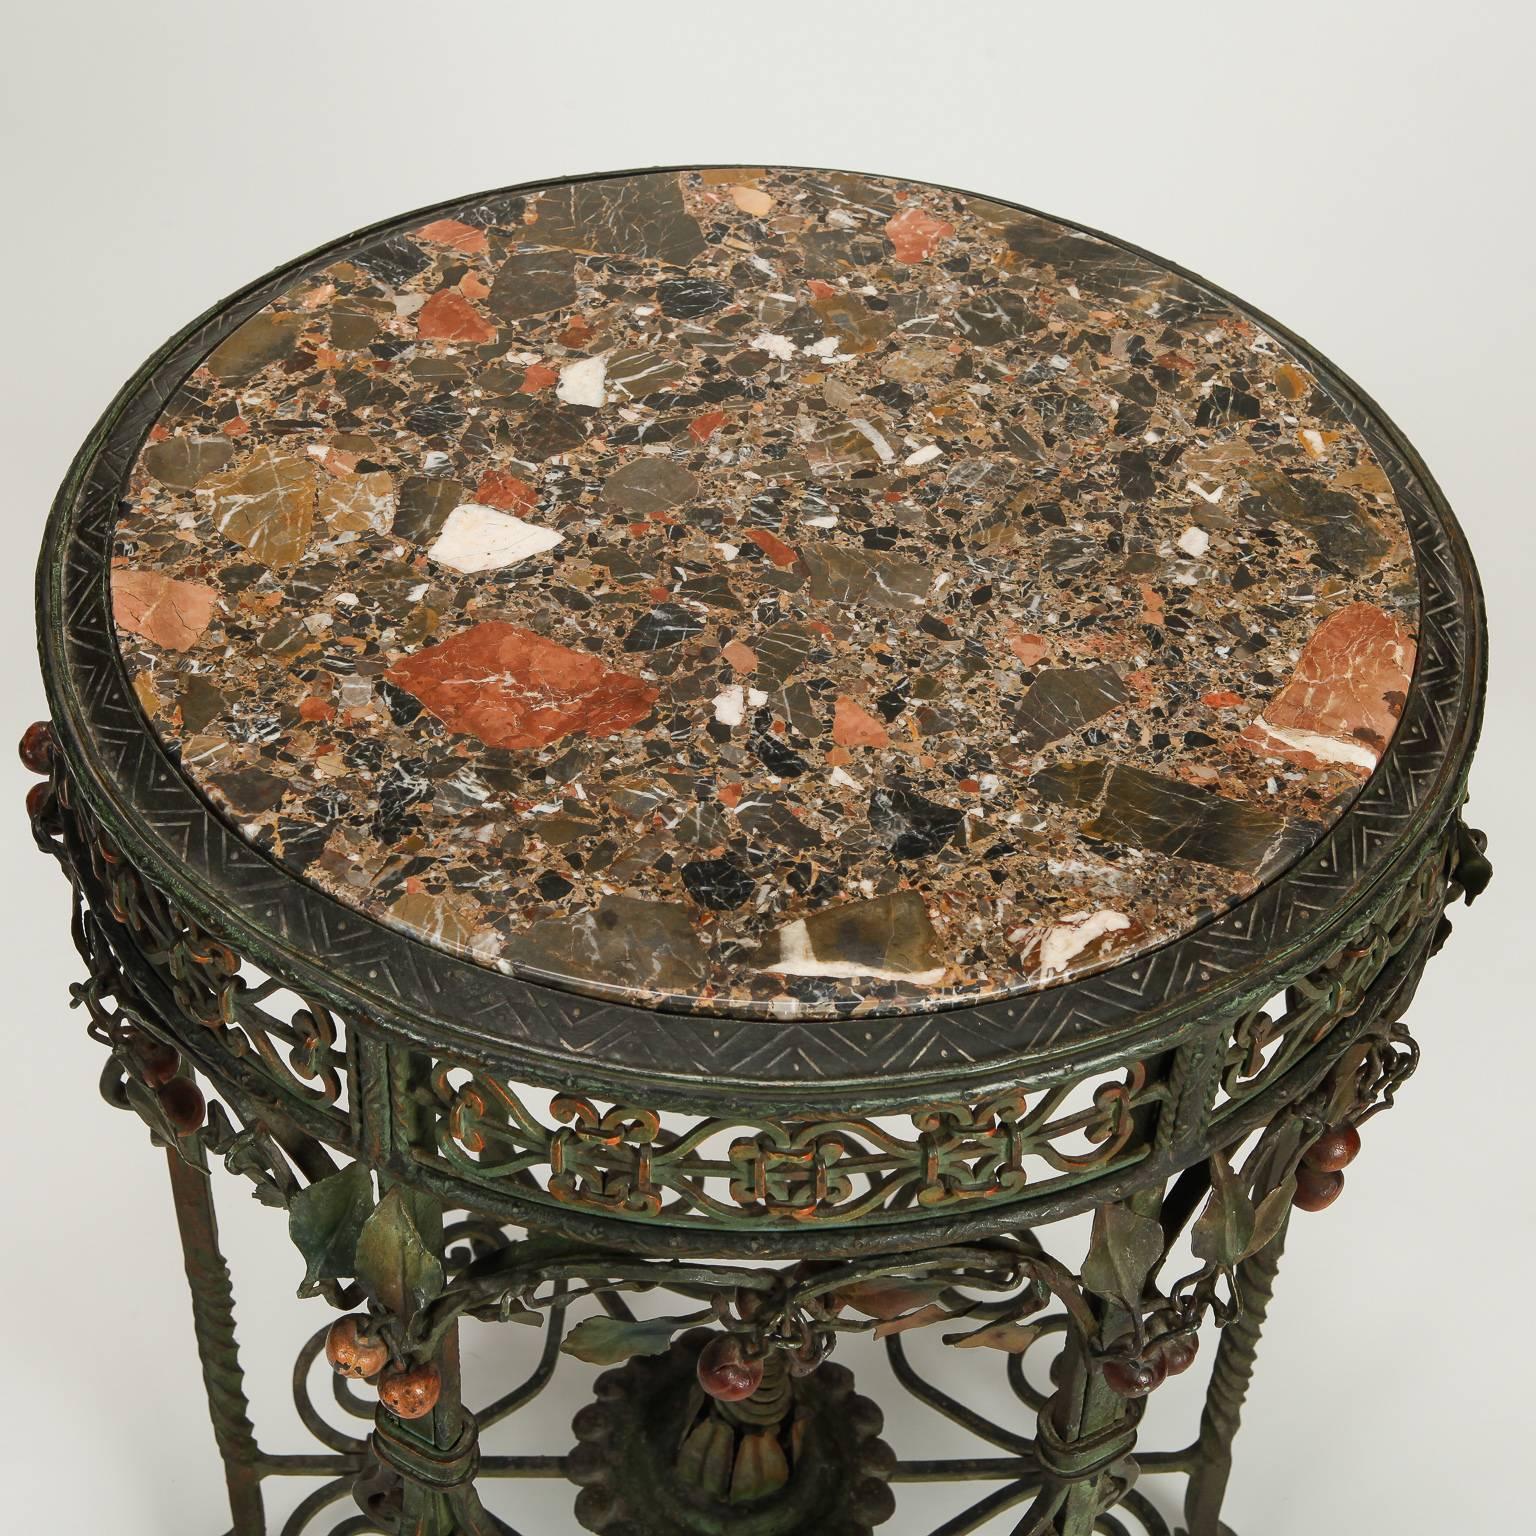 Forged Small Center Table with Marble Top and Elaborate Iron Base